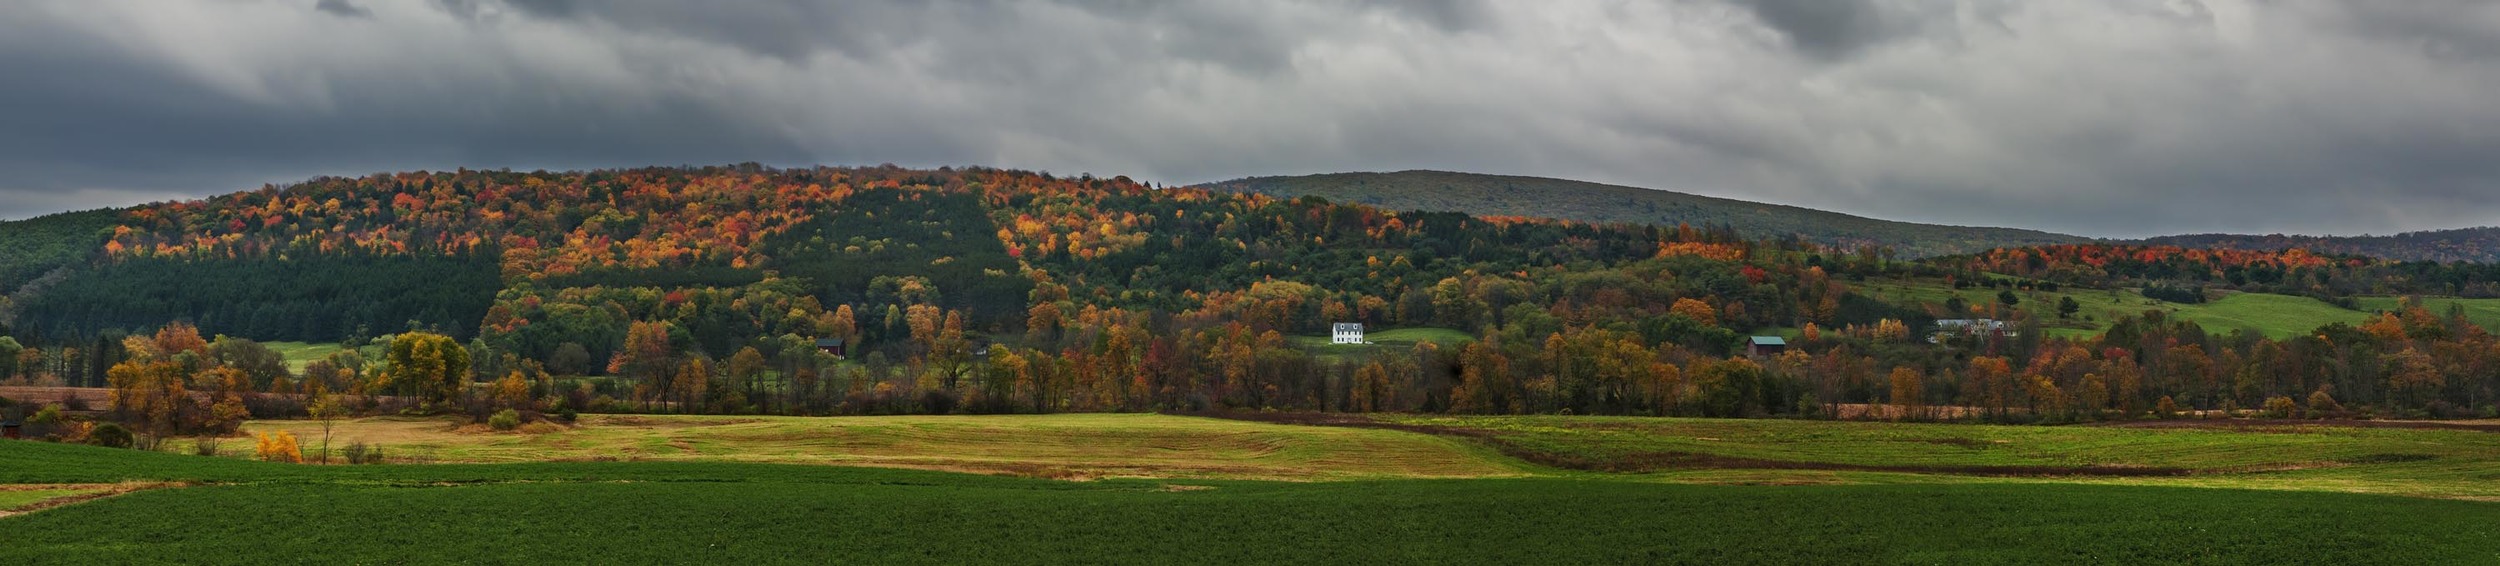 Cooperstown in Fall.jpg